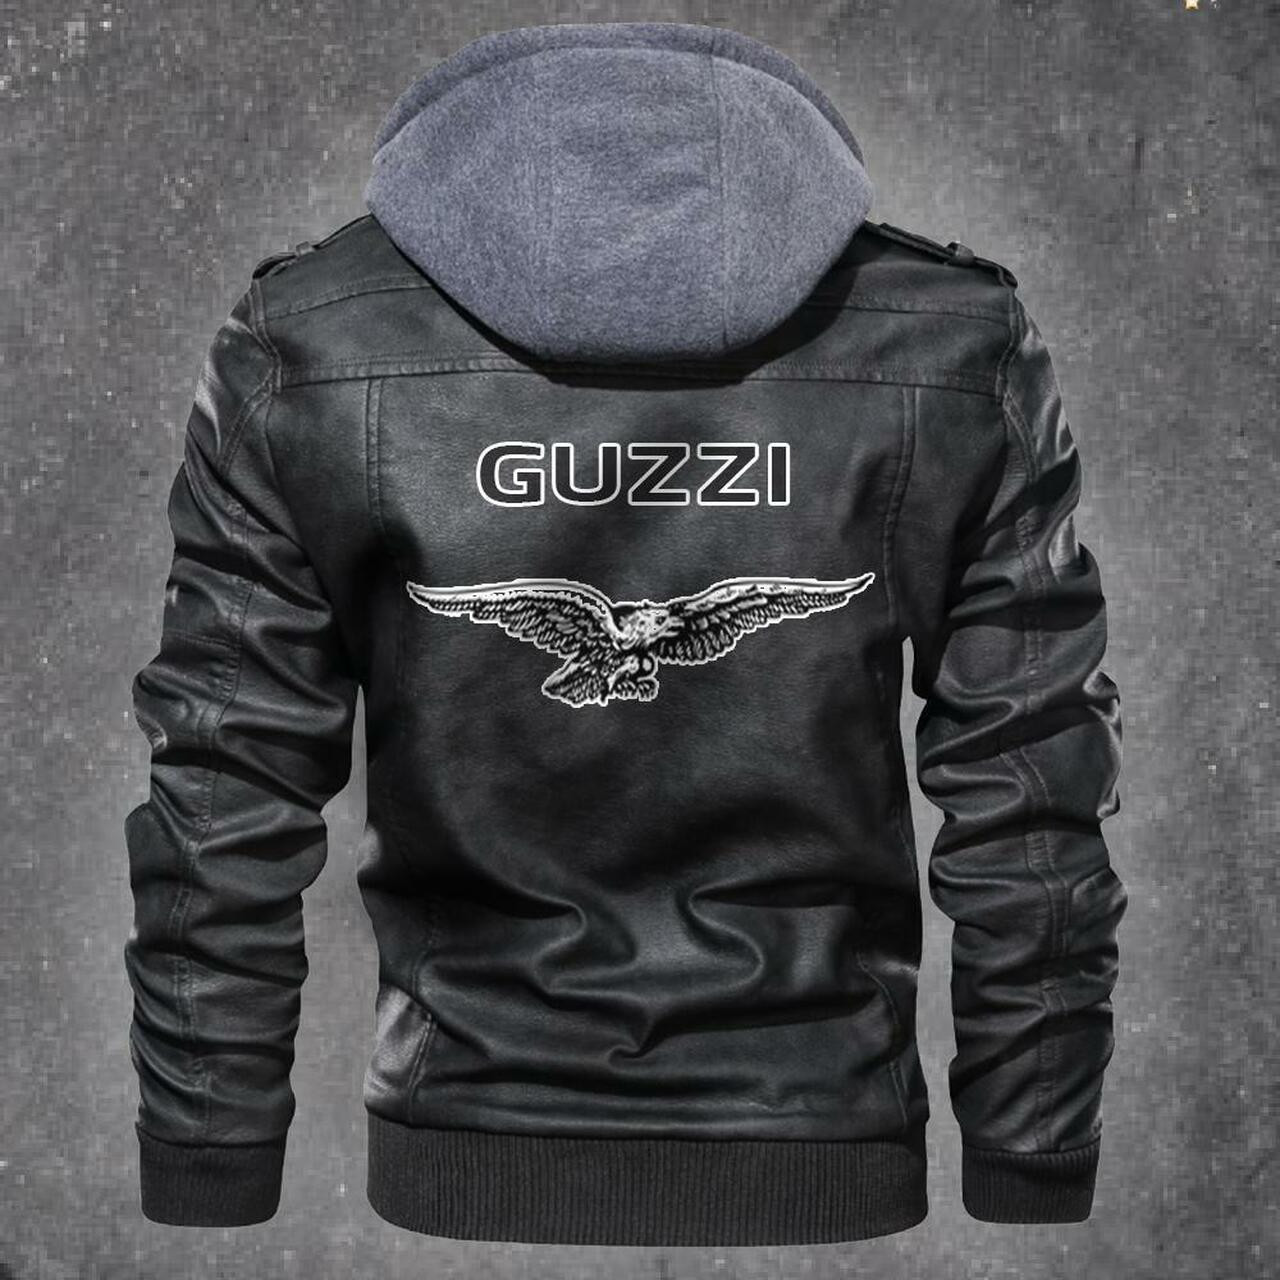 You can find a good leather jacket by access our website 229